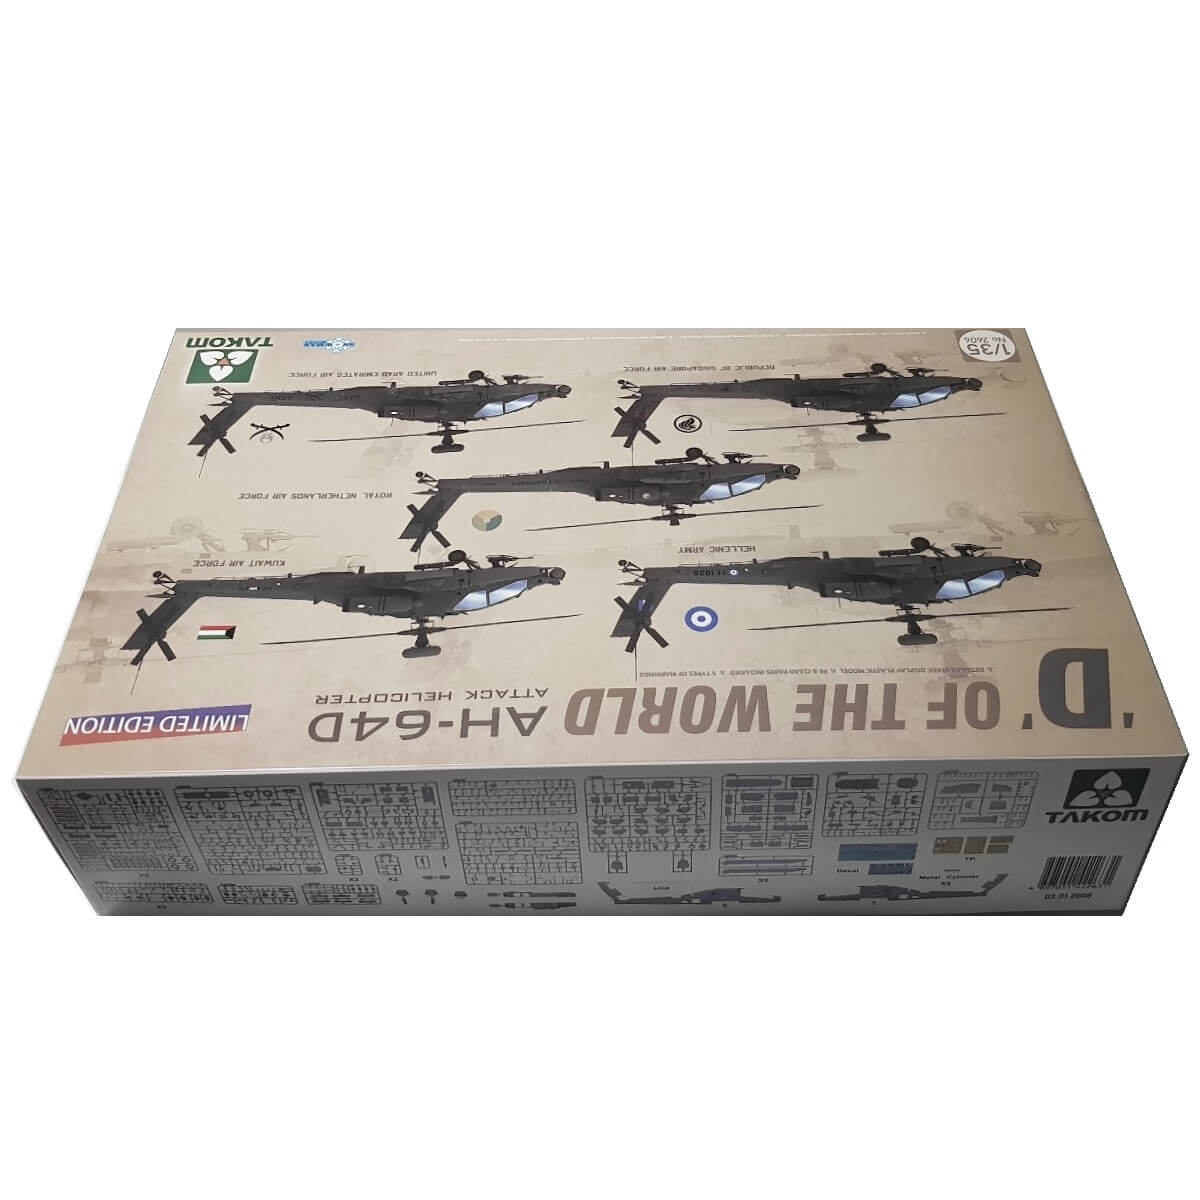 1:35 AH-64D Attack Helicopter - D of the World - TAKOM